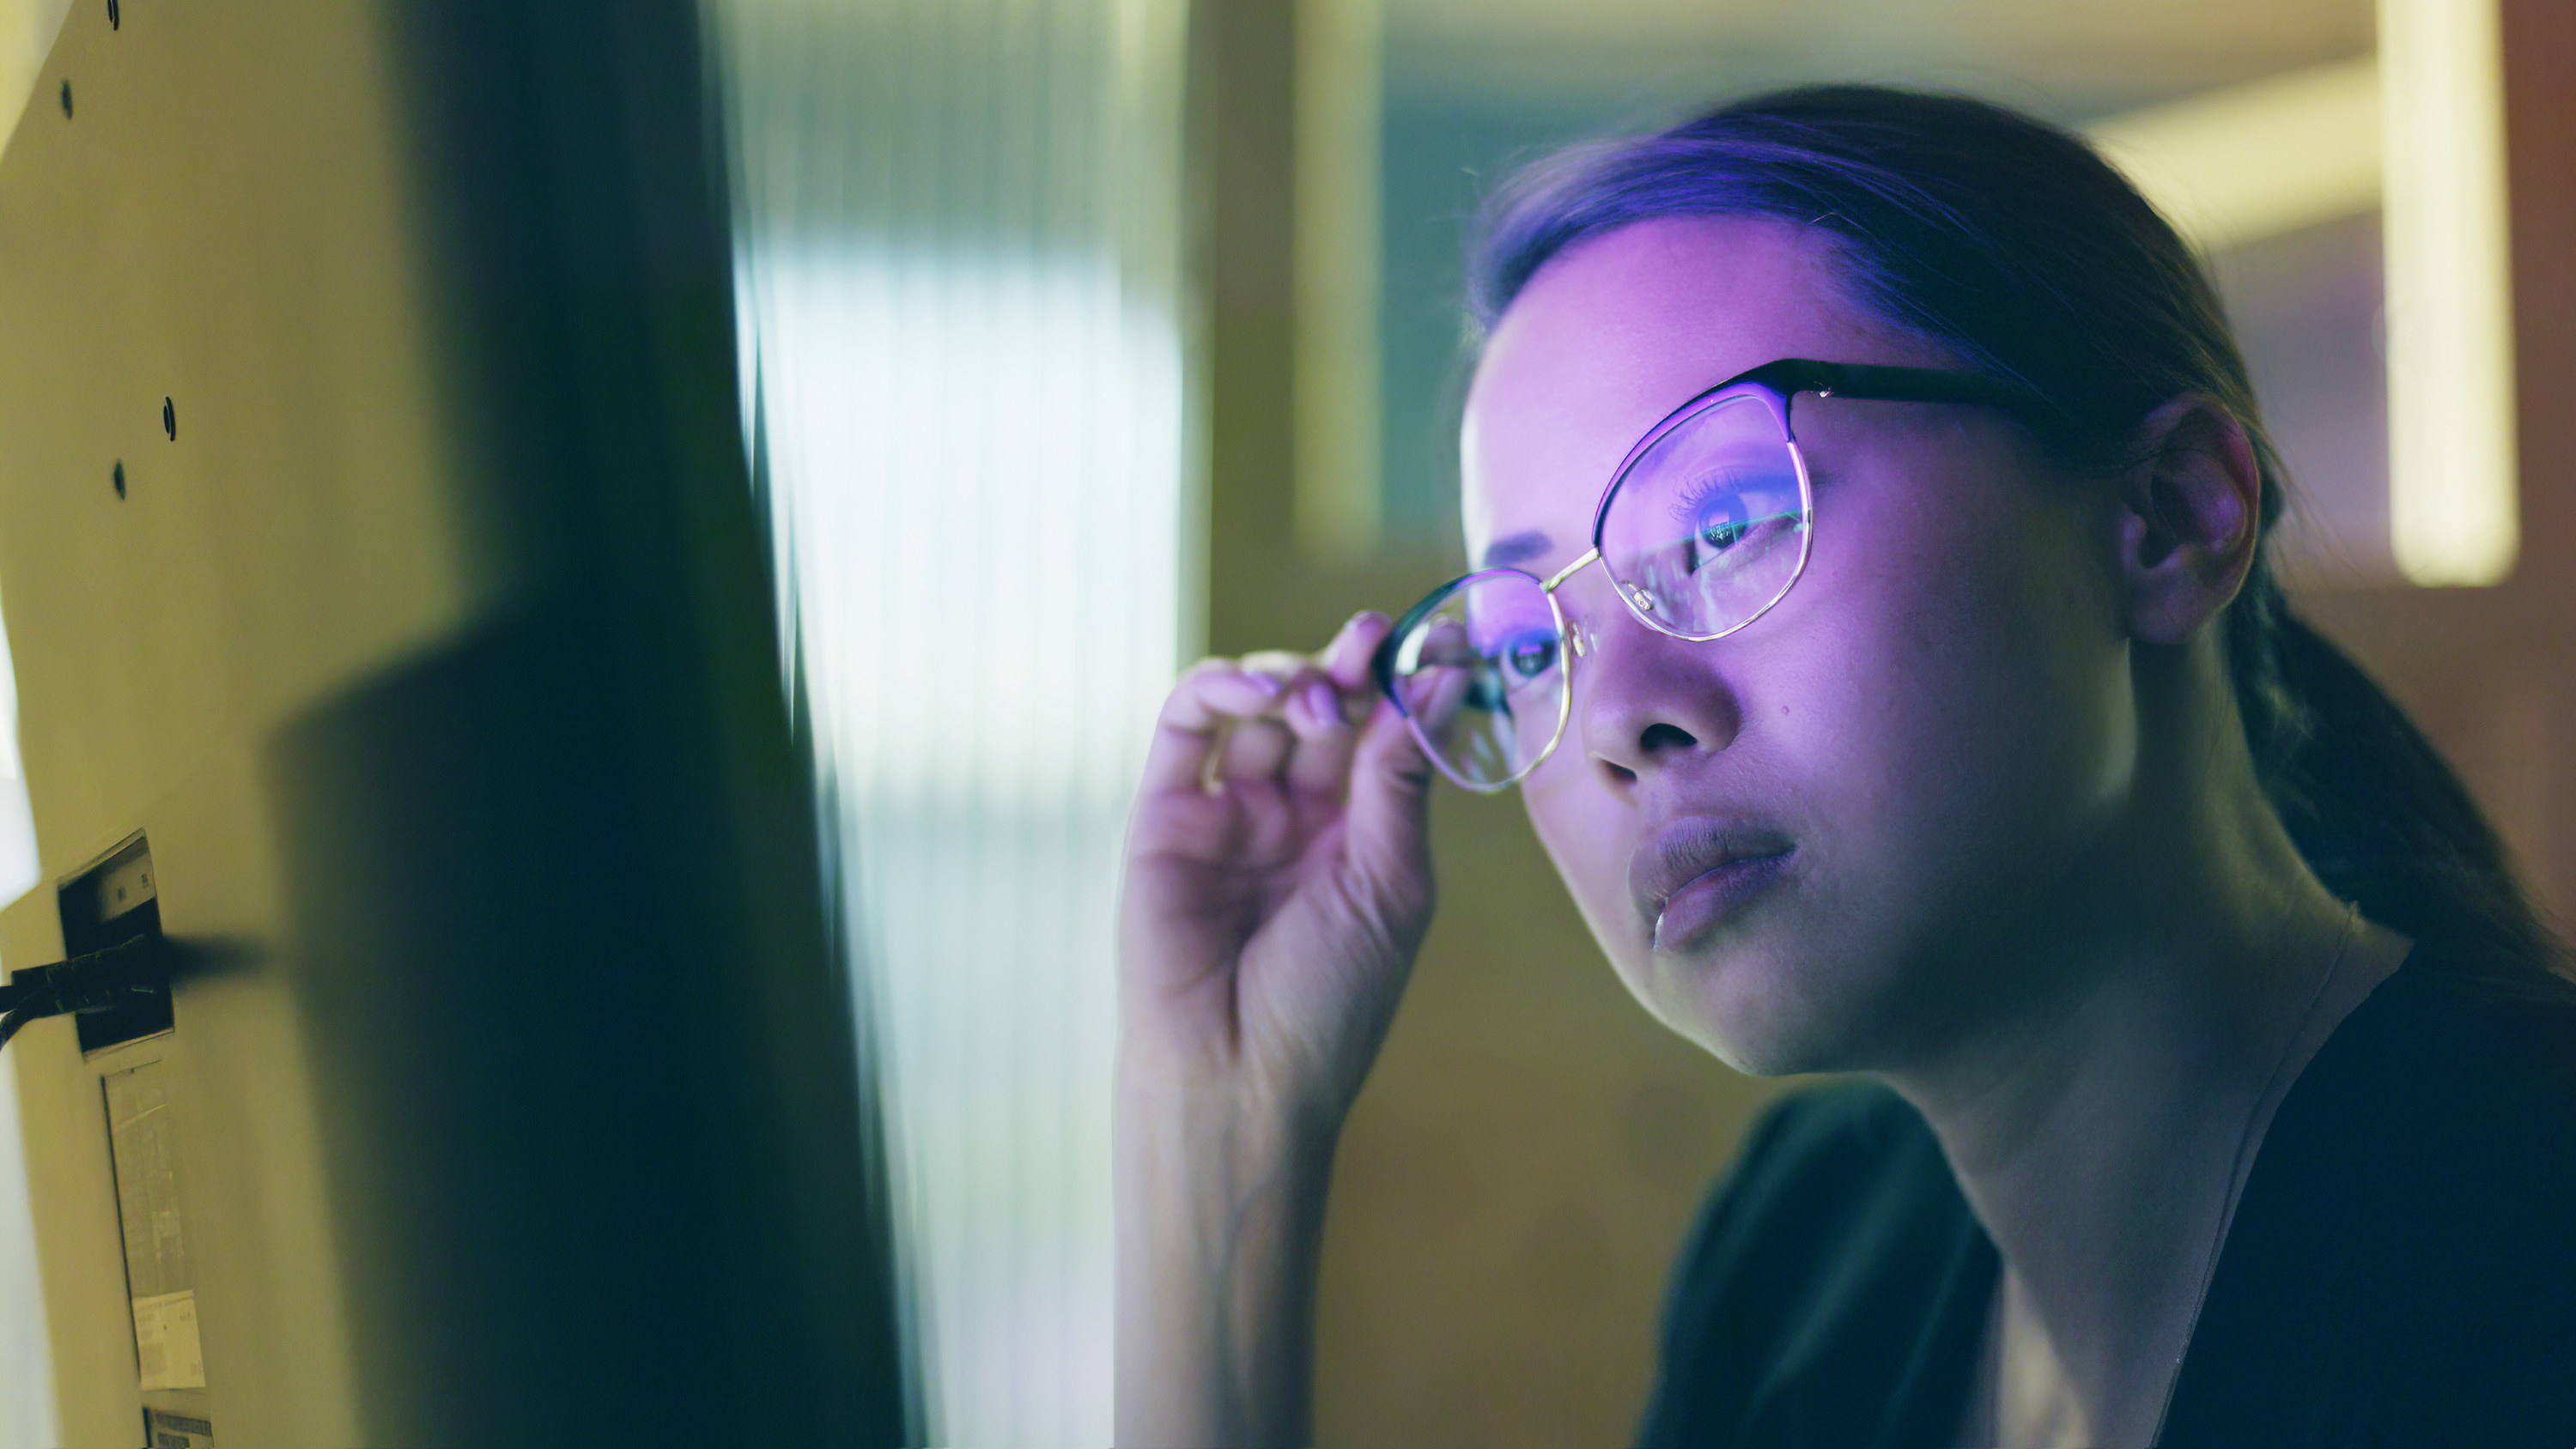 A woman stares at a computer screen